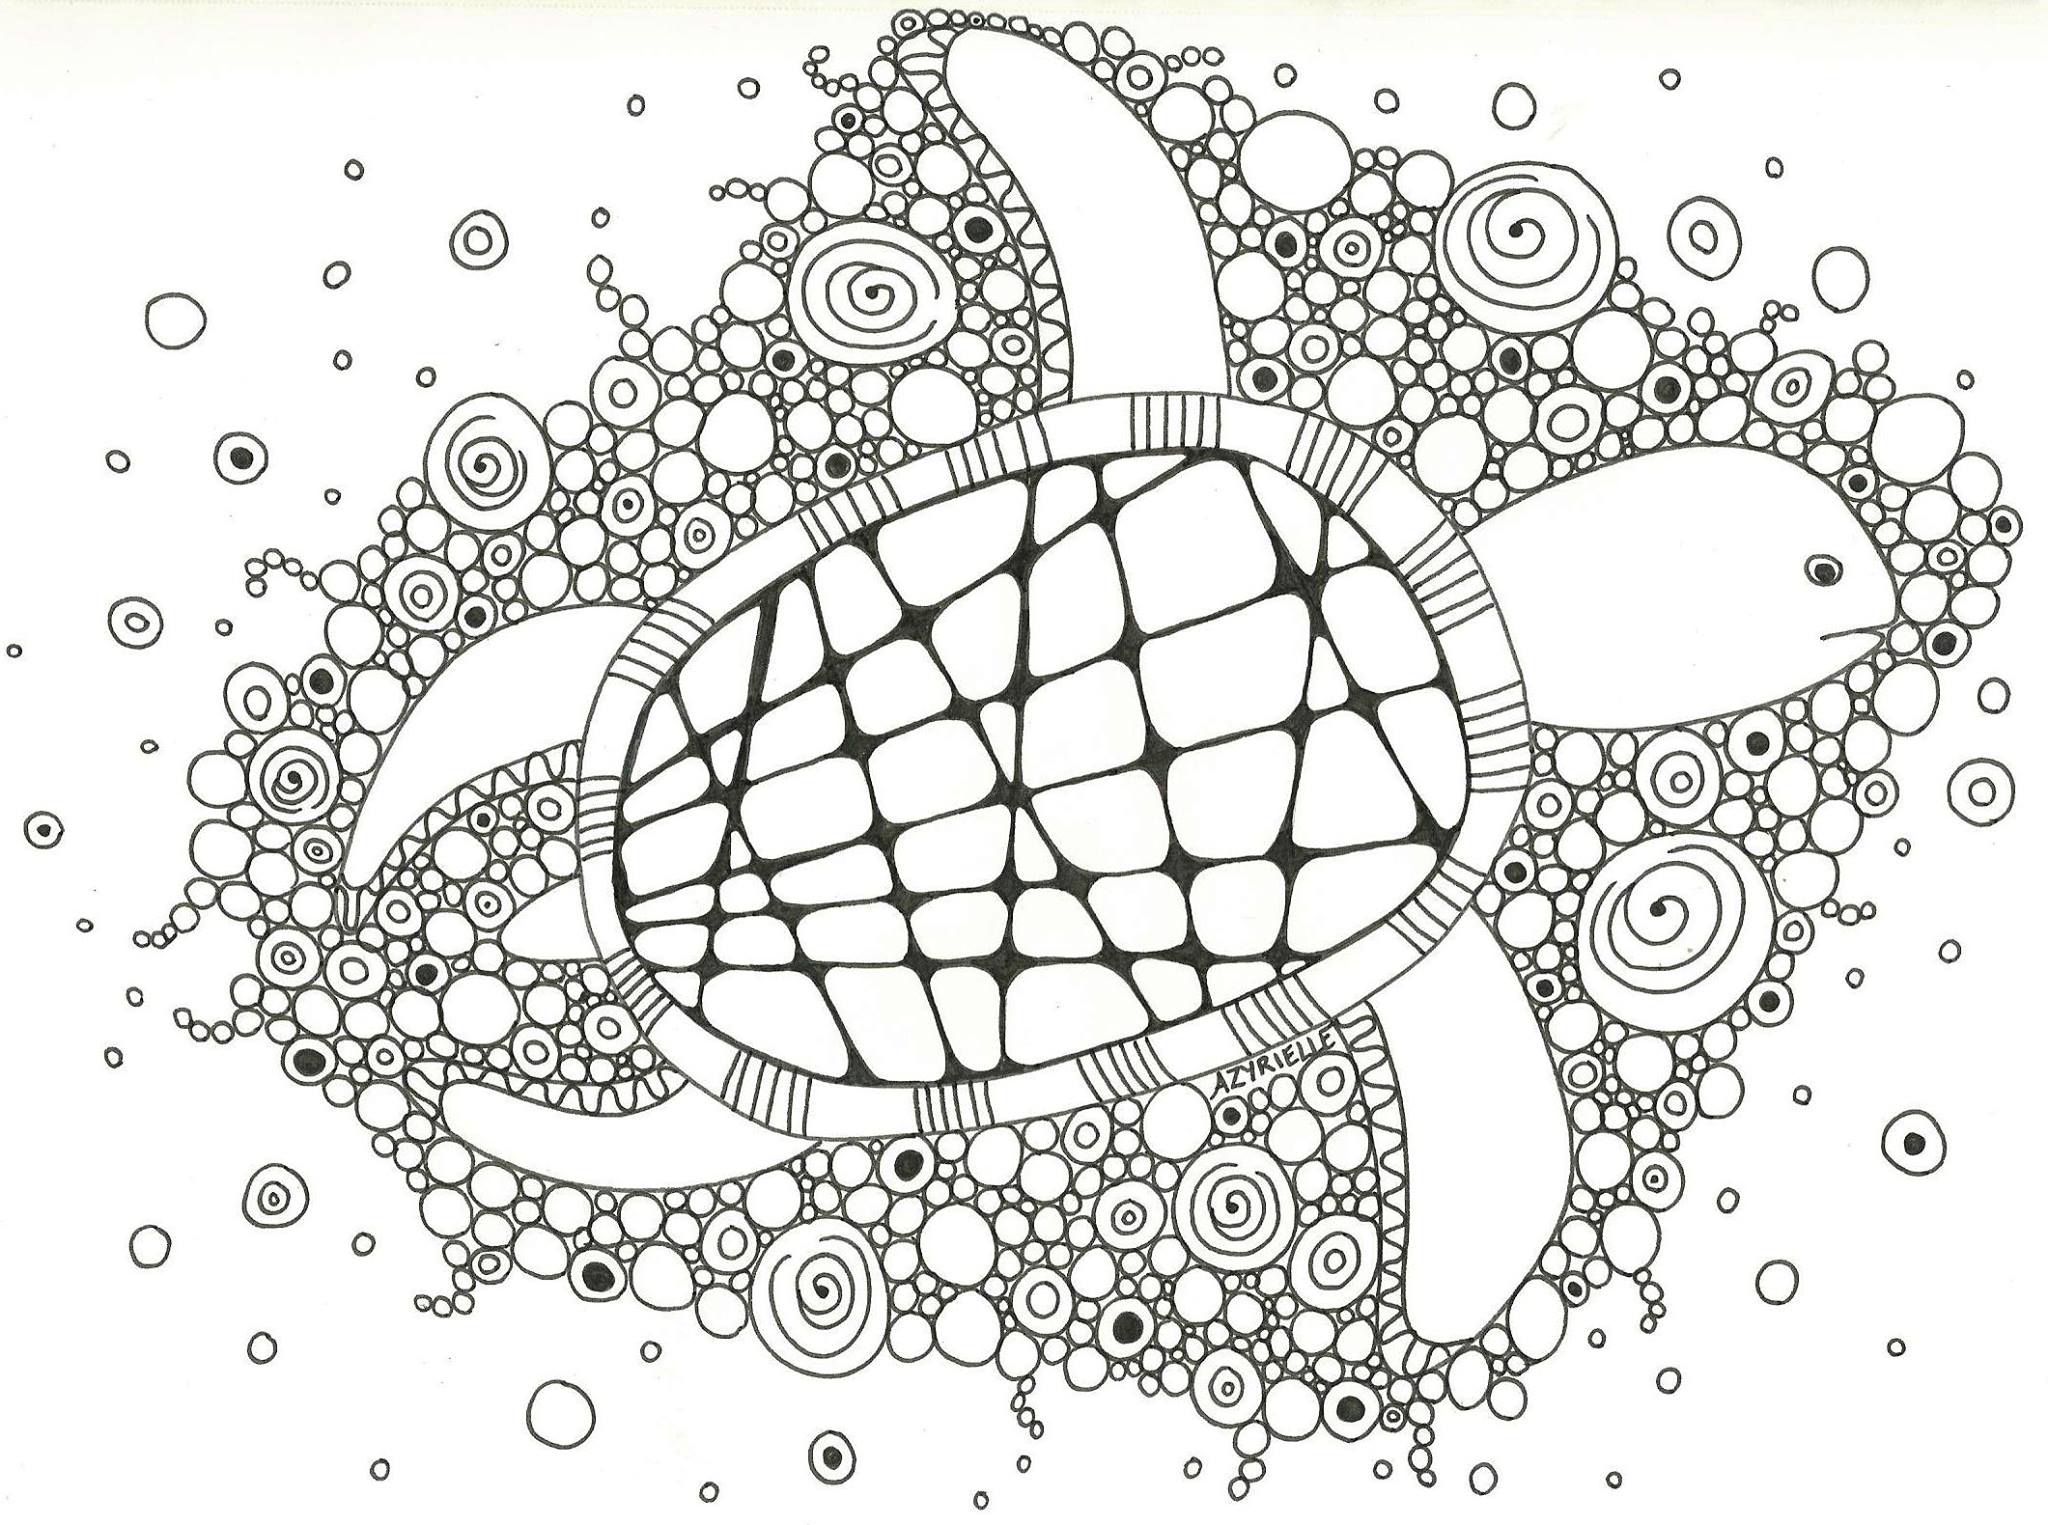 The turtle and its bubbles, Artist : Azyrielle